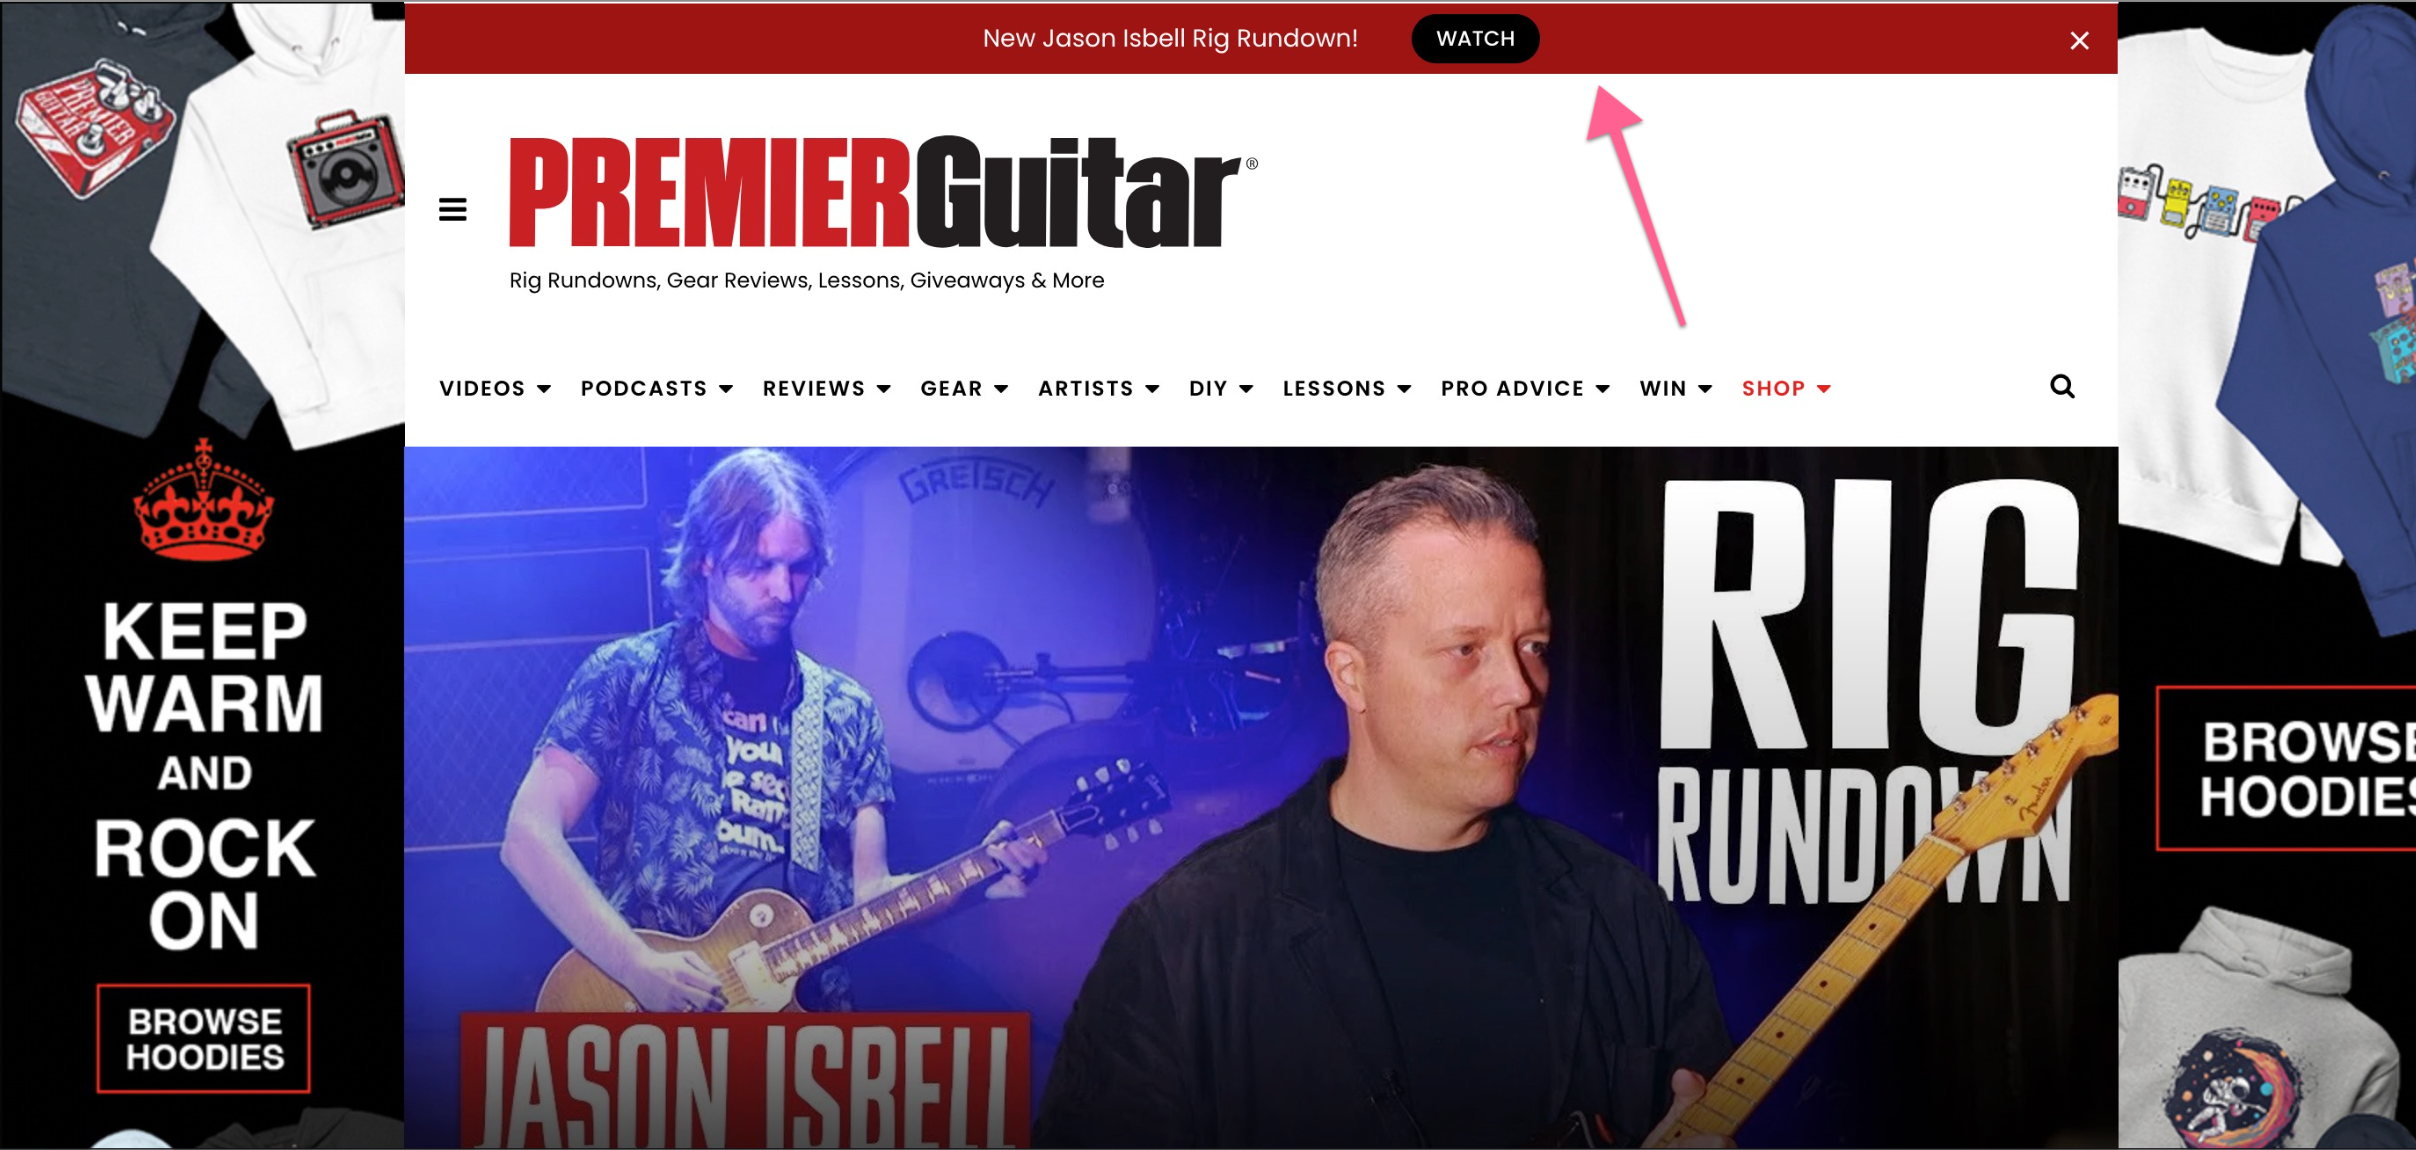 announcement bar sticky position at the top of Premier Guitar website page